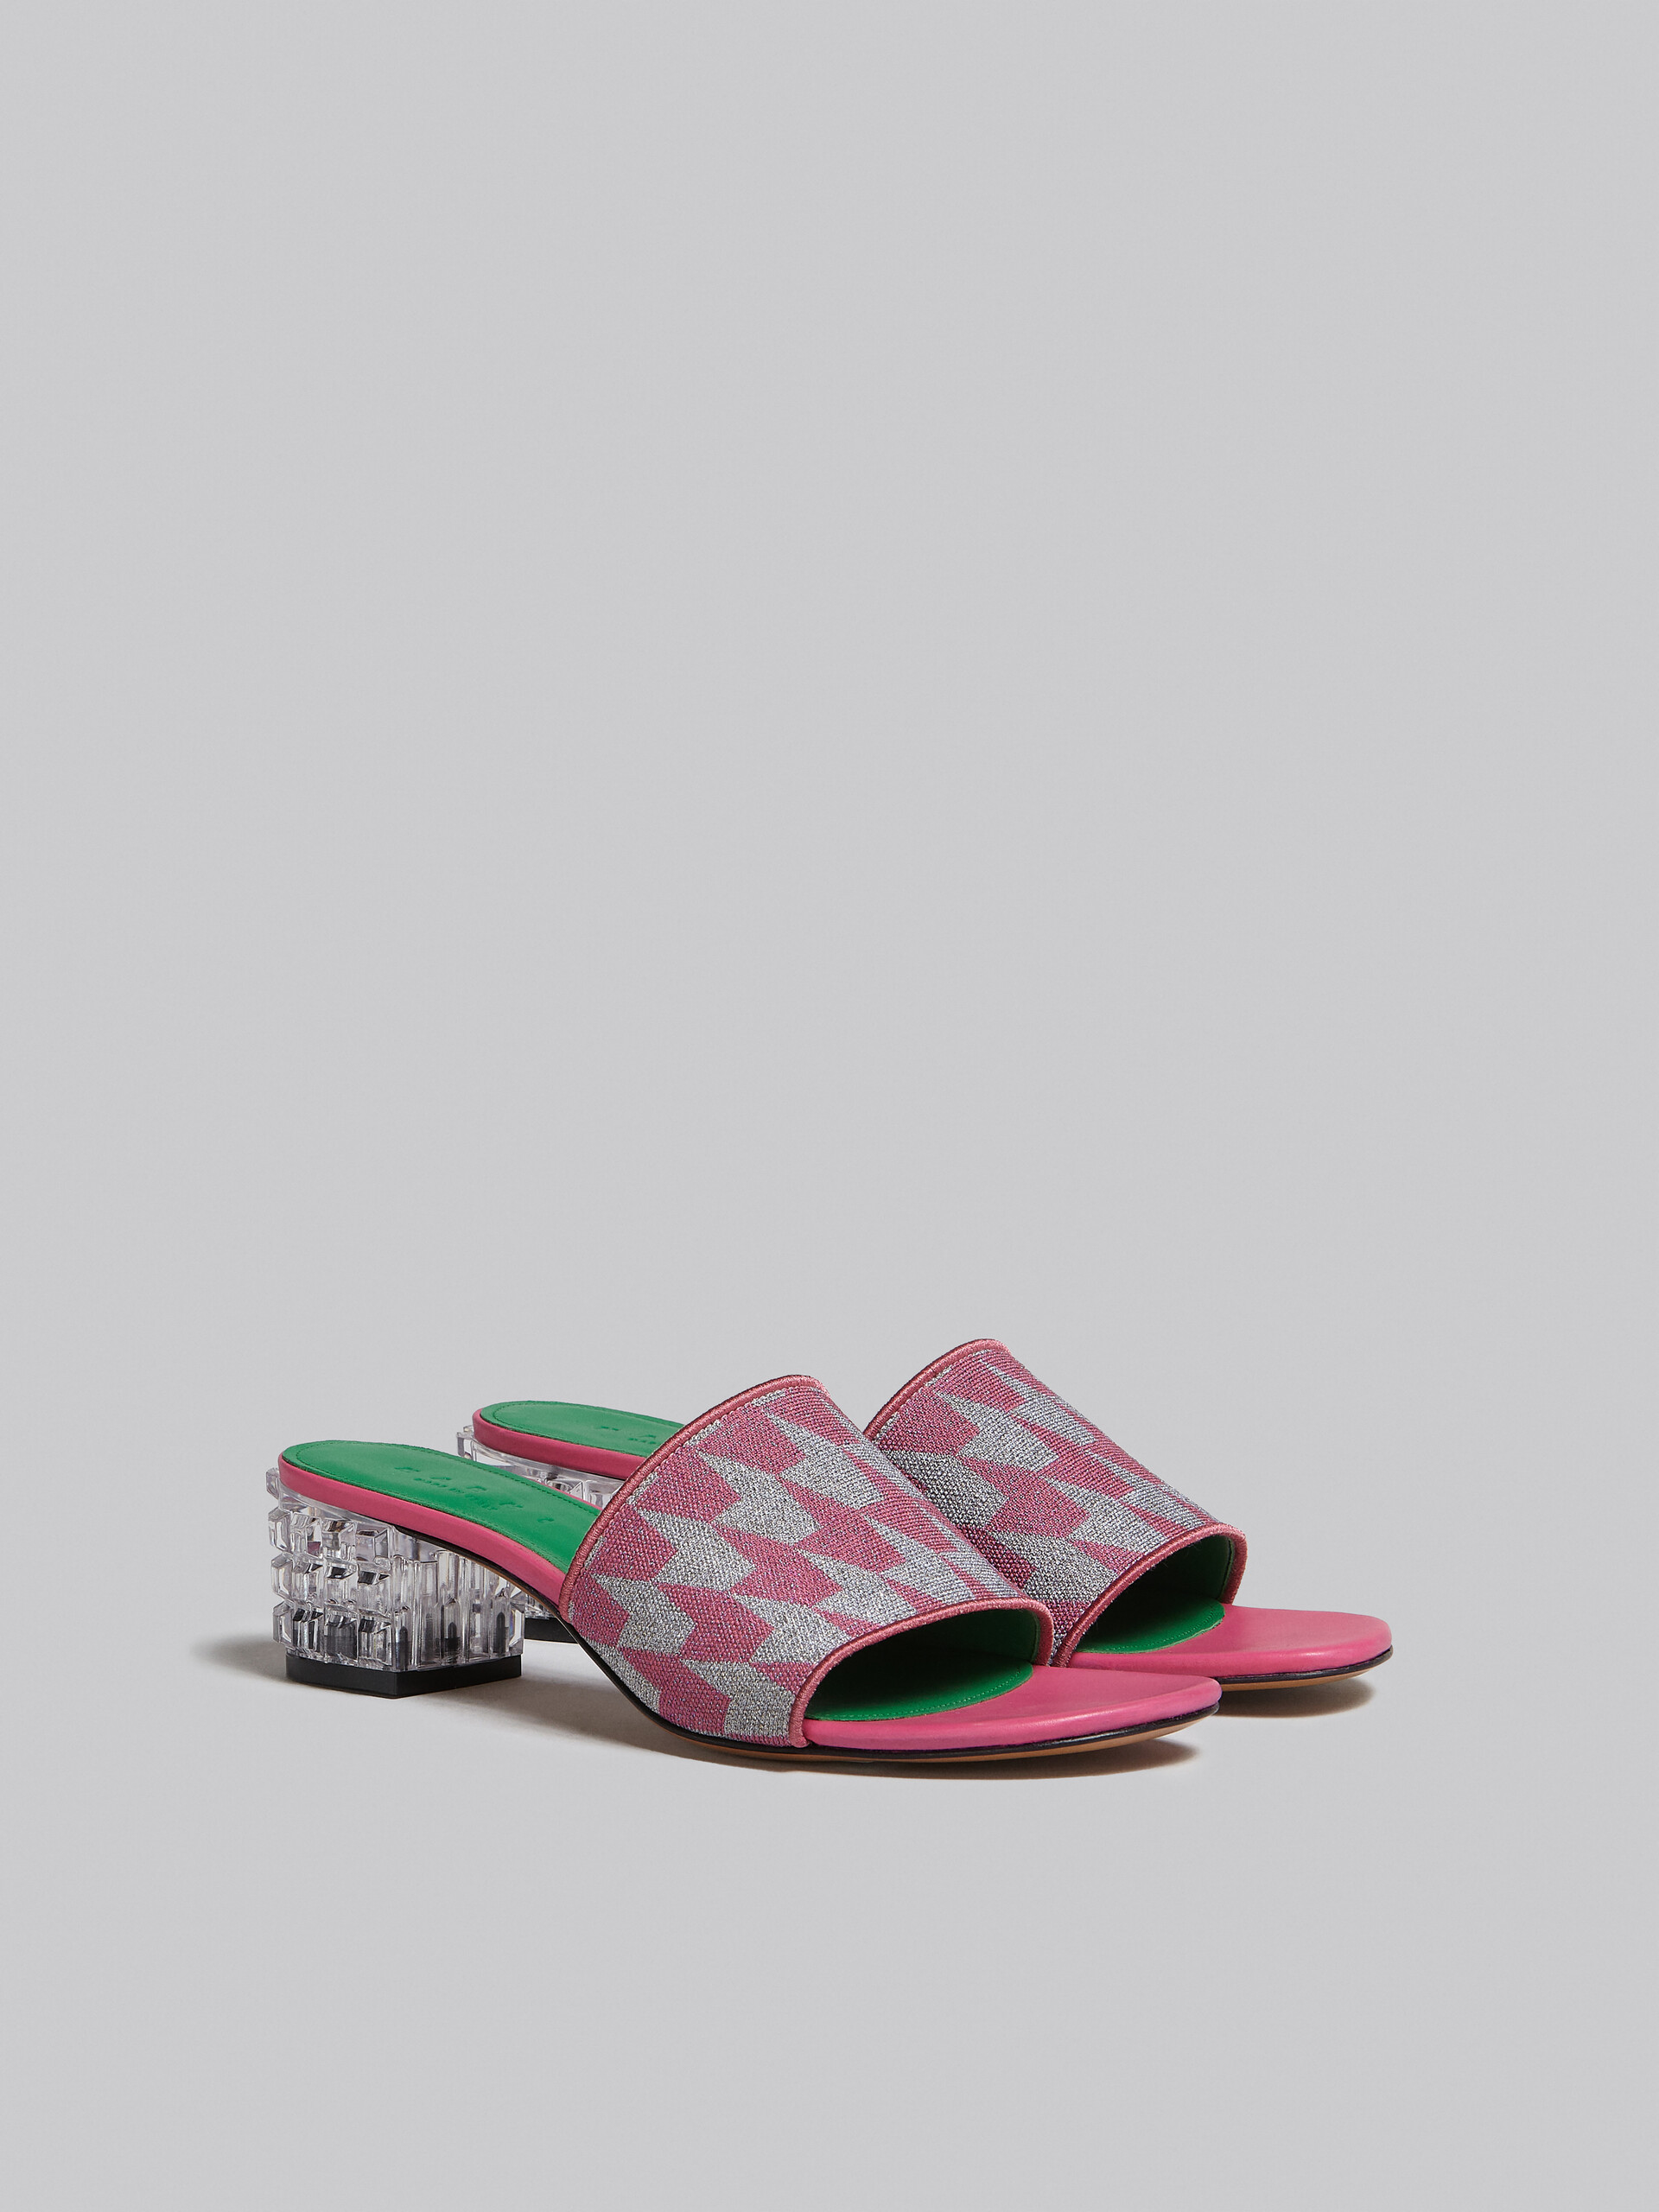 Lurex pink and silver sabot with houndstooth motif - Sandals - Image 2